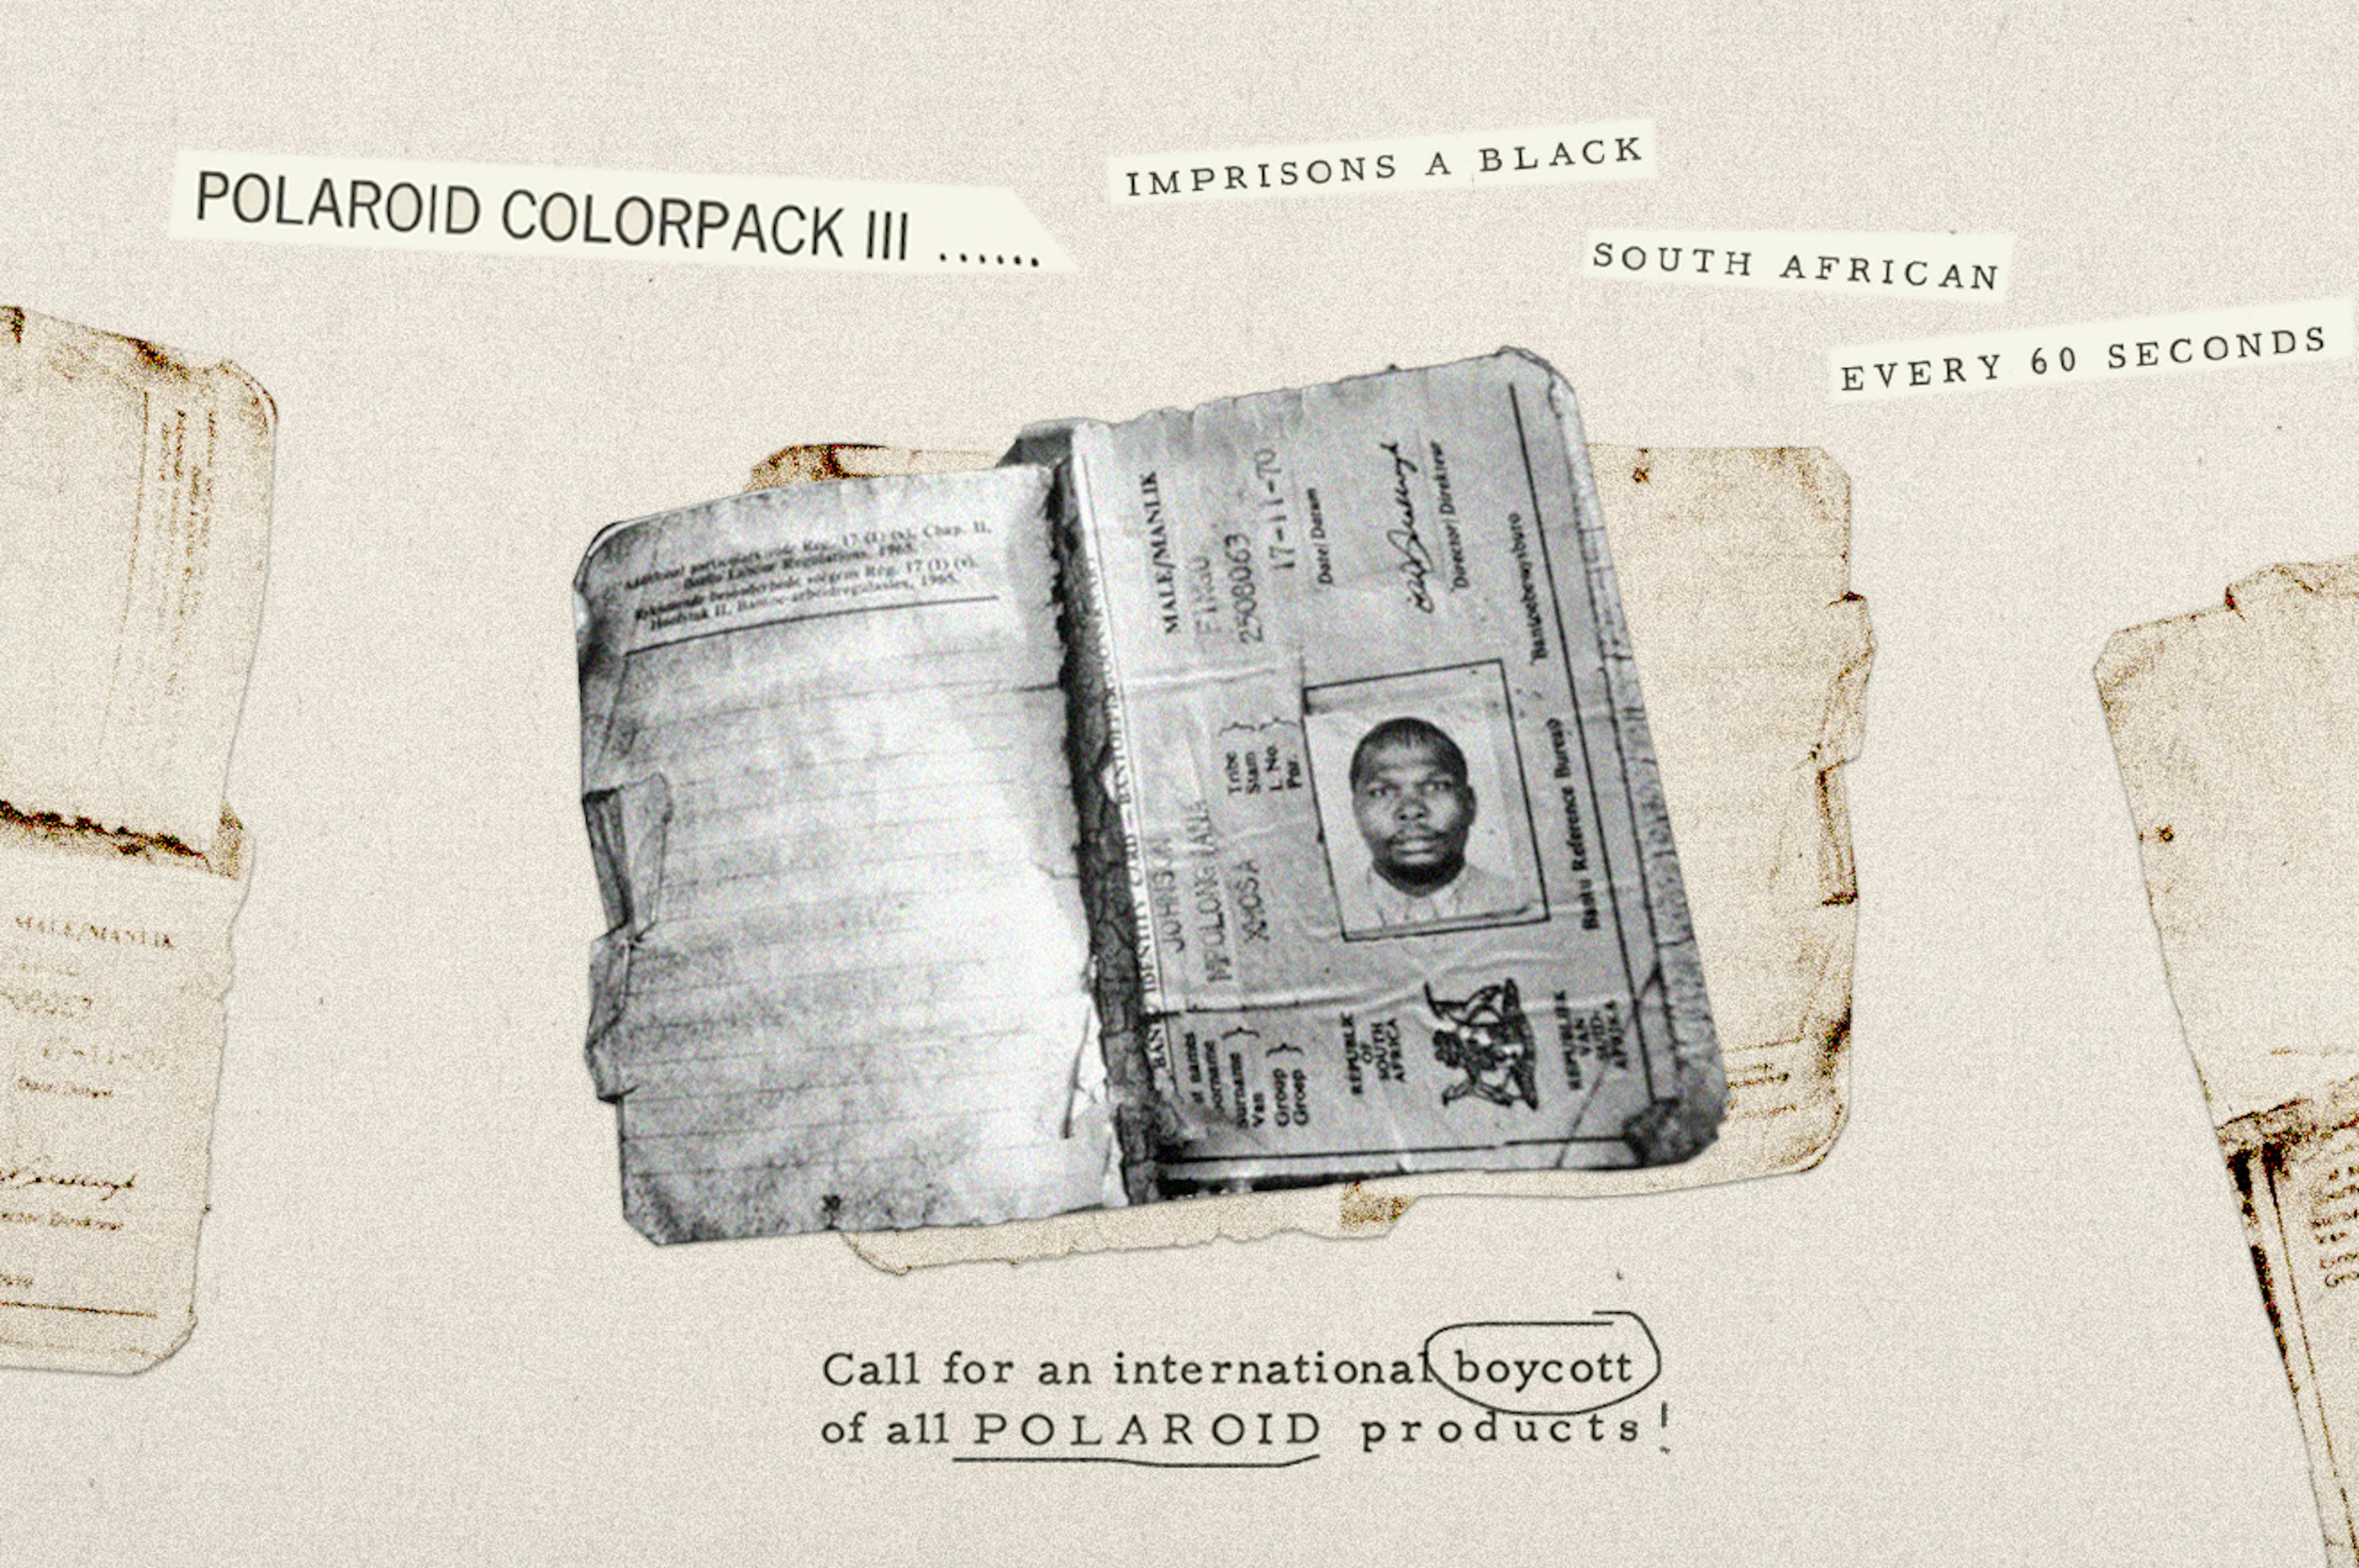 An illustration of an apartheid-era passbook with a photo of a black man with text below calling for a boycott of Polaroid